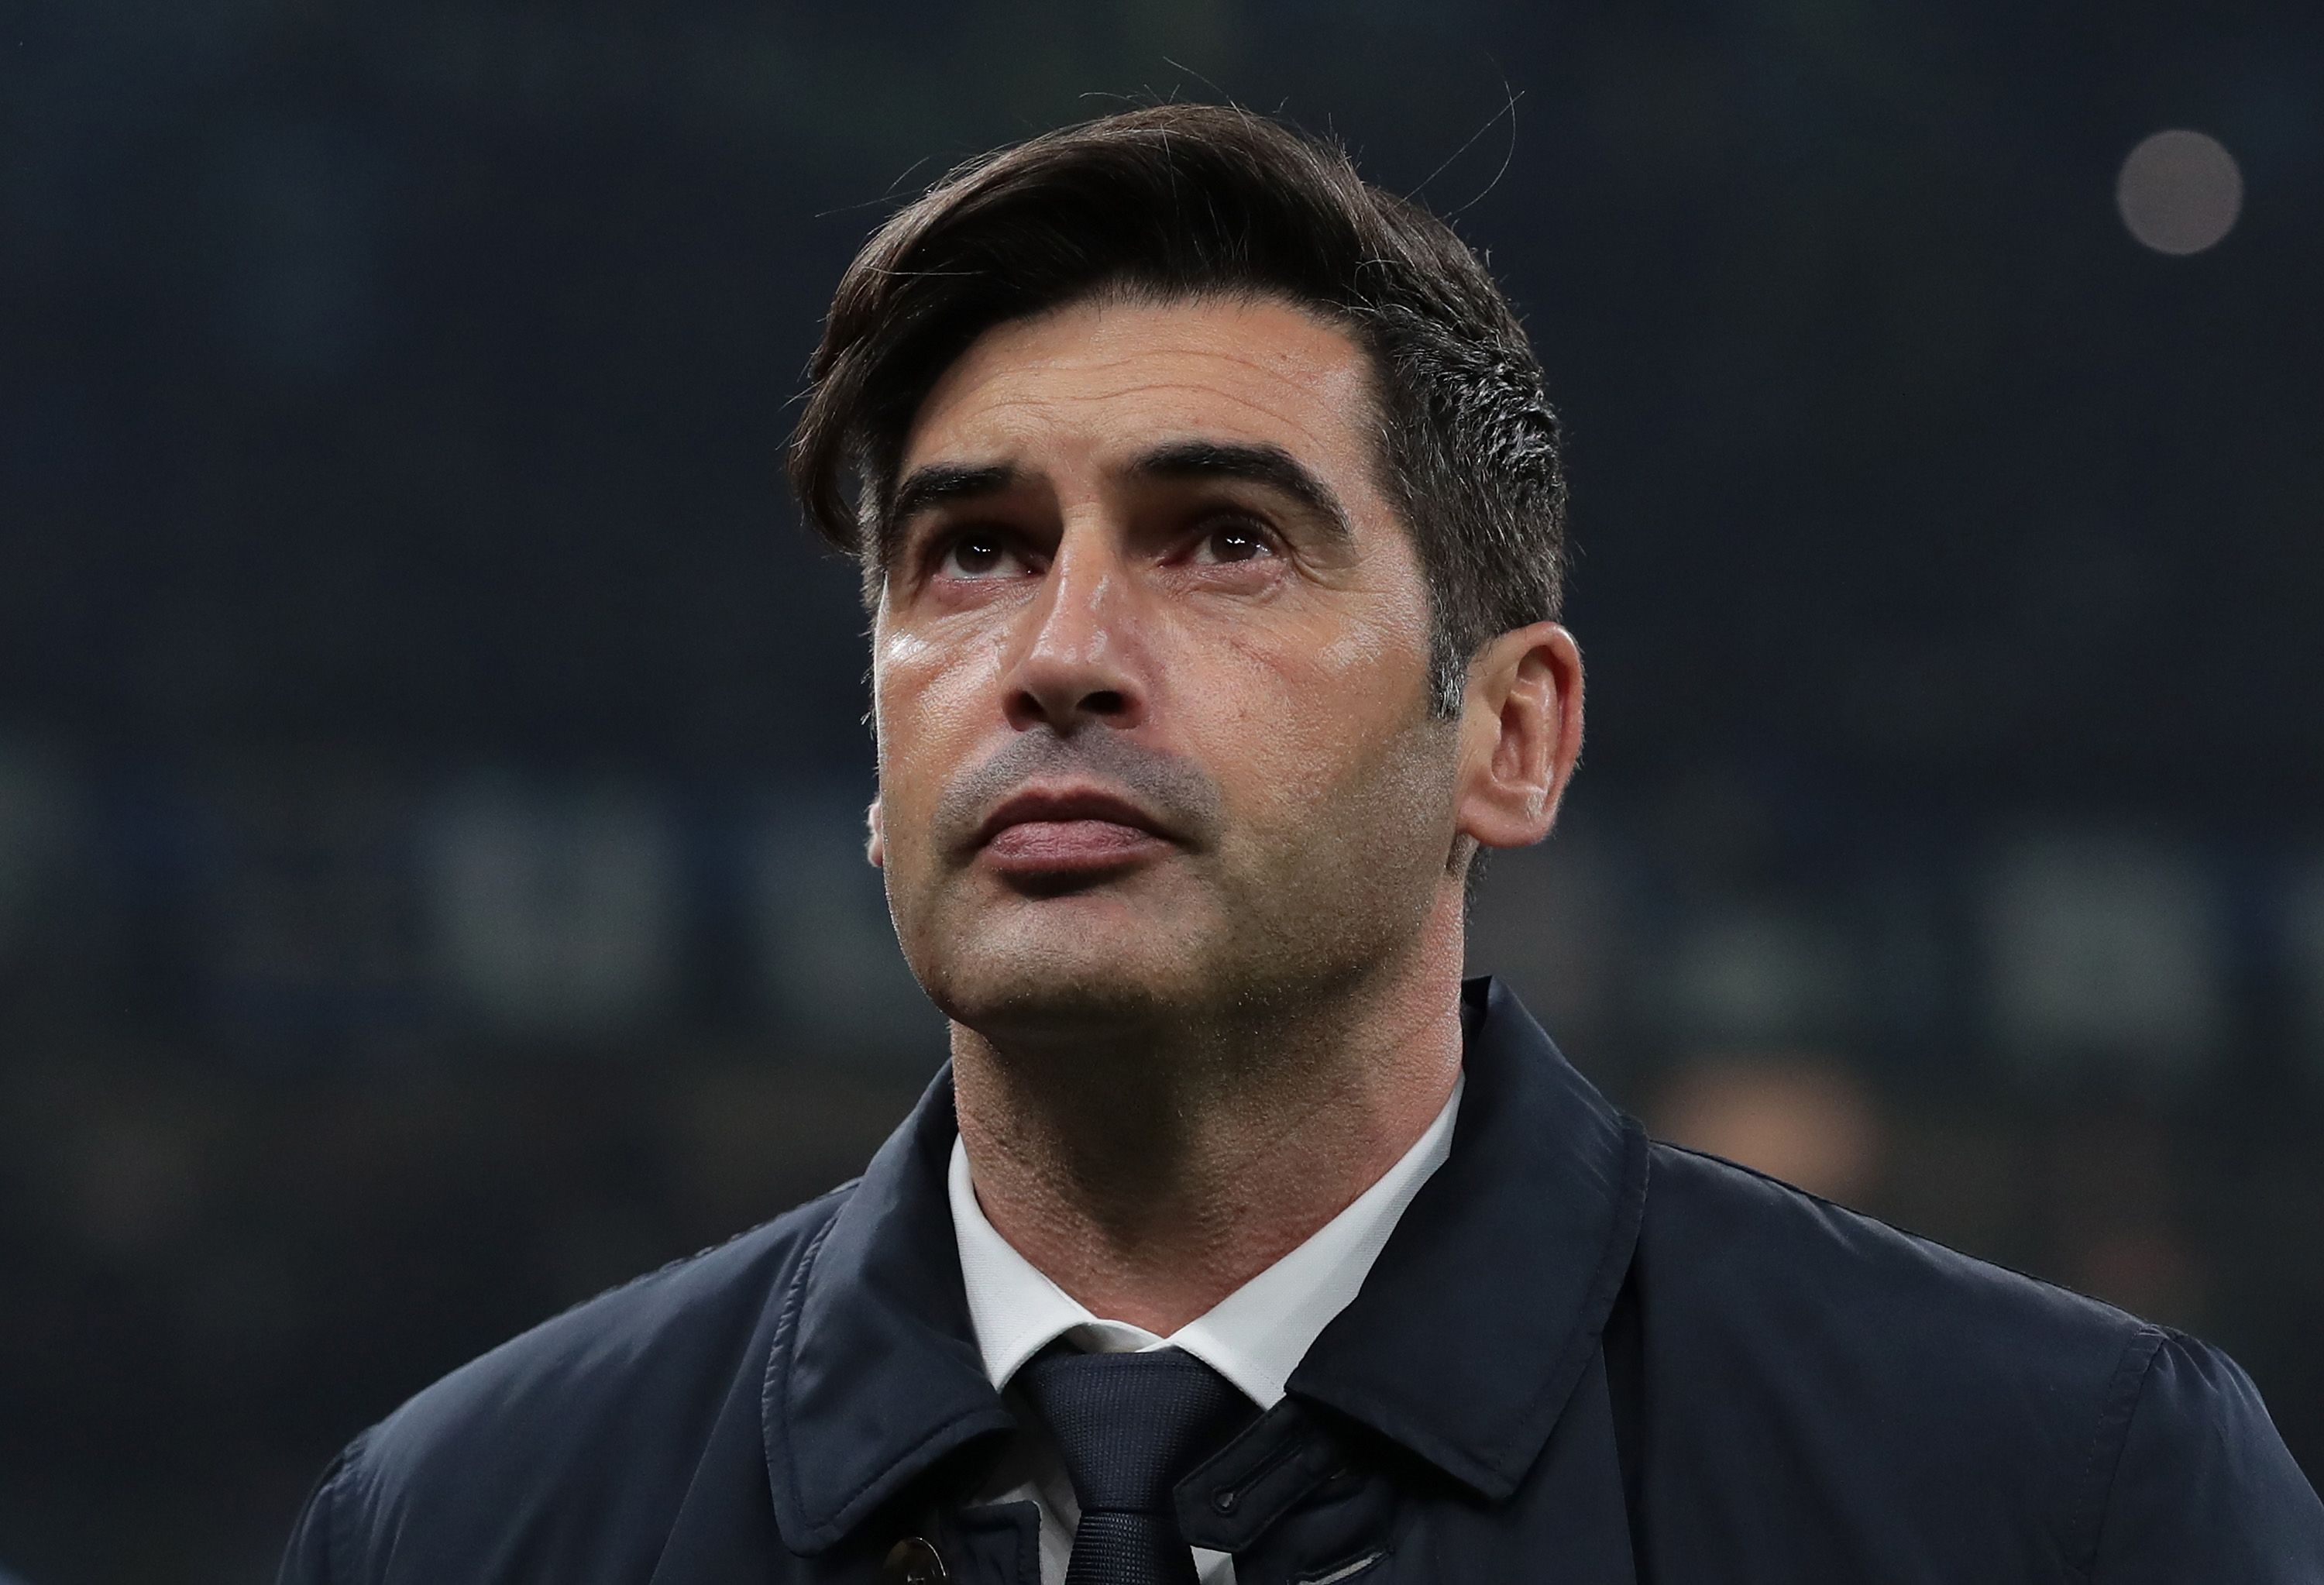 Paulo Fonseca: Former Roma manager shares family escape story from Ukraine  | CNN